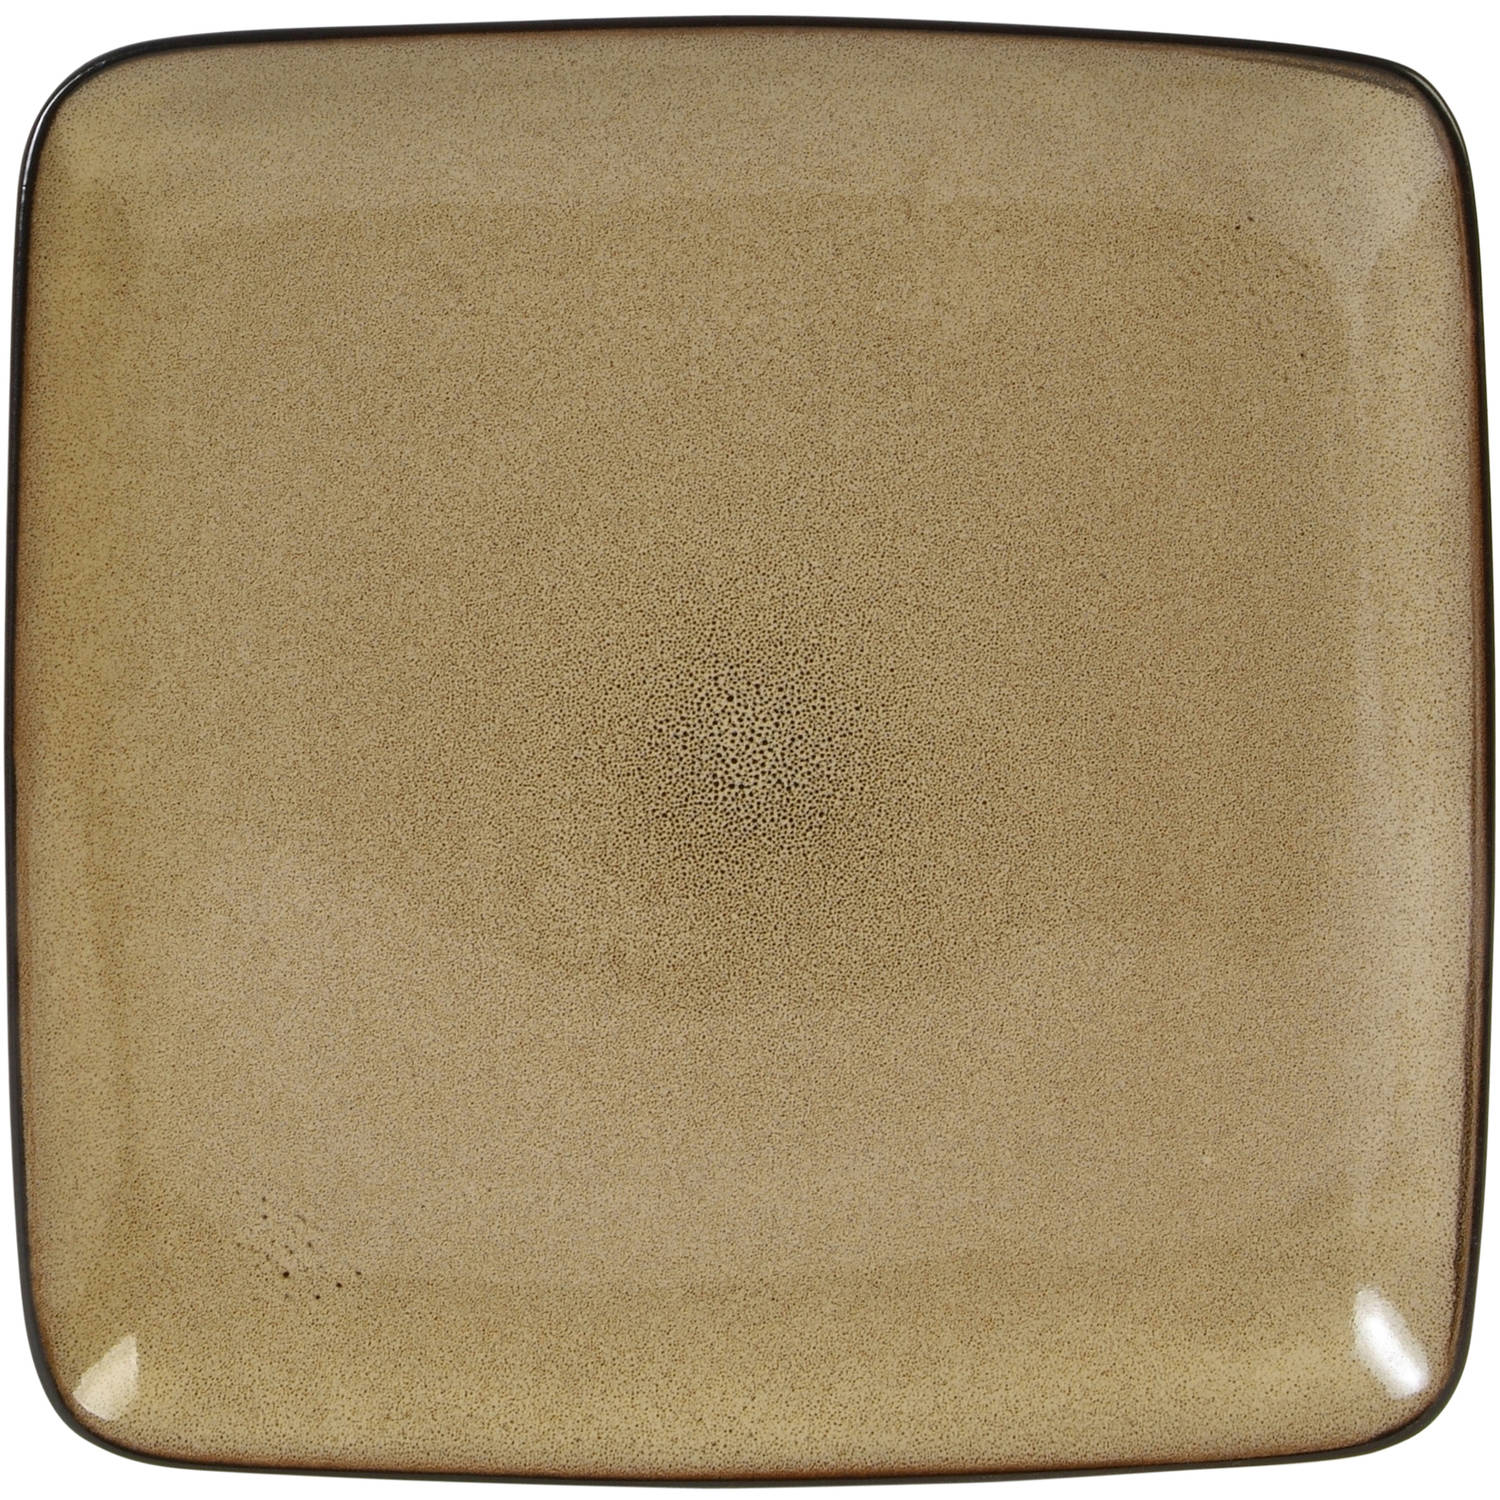 Gibson Home Rave Square 16-Piece Dinnerware Set, Taupe - image 3 of 8